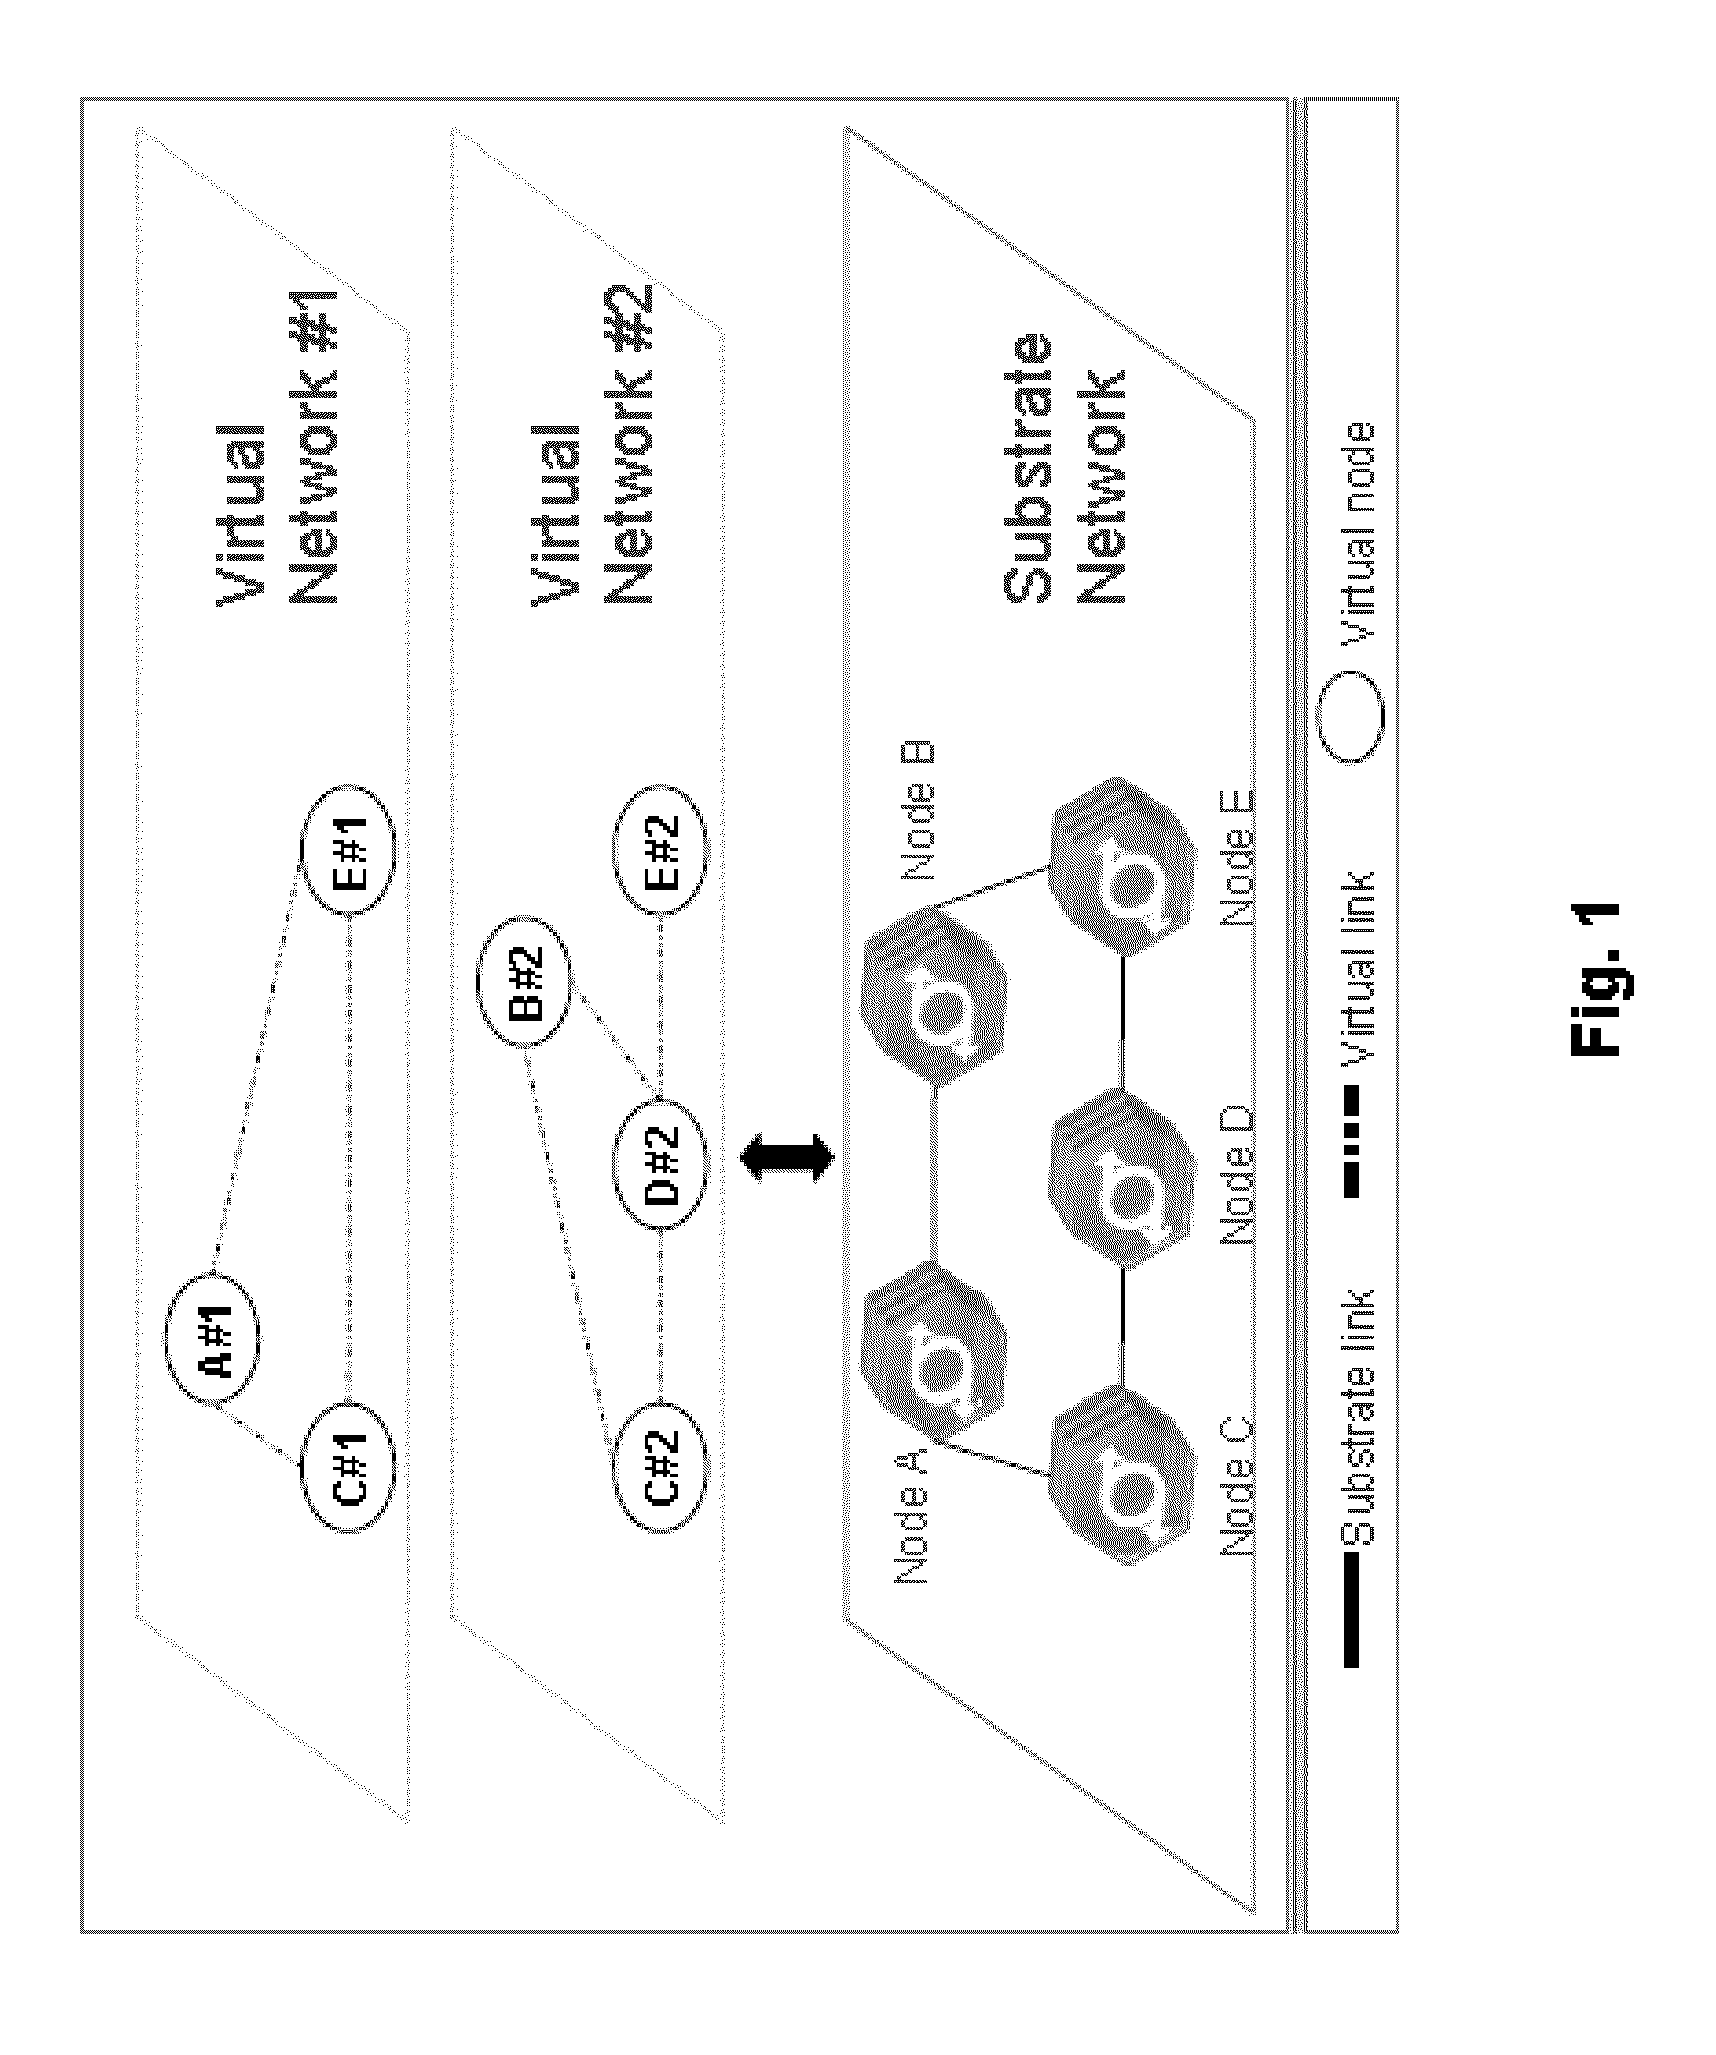 Method for operating at least one virtual network on a substrate network and a virtual network environment